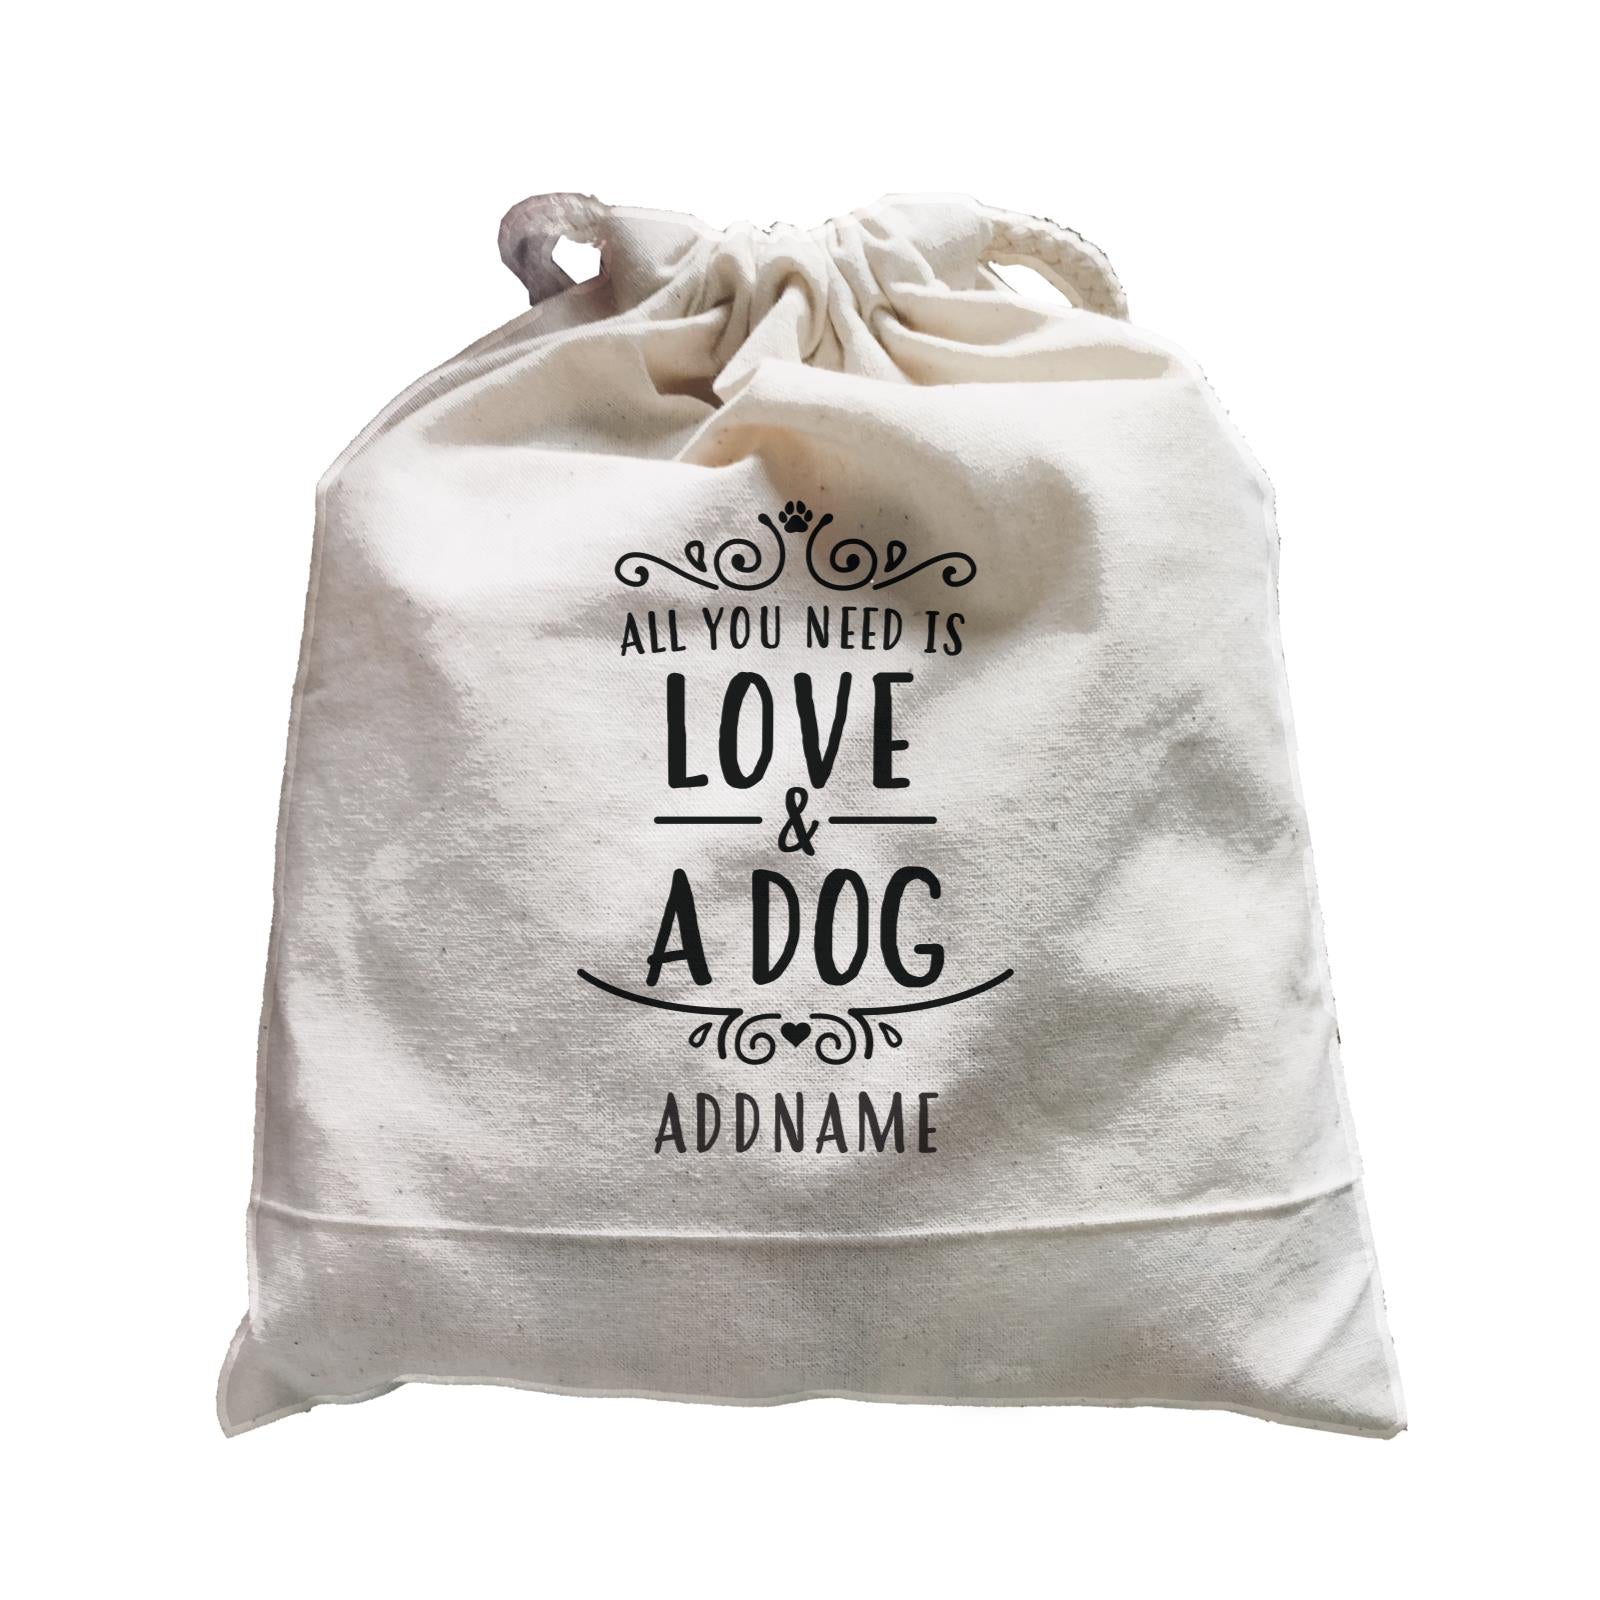 Random Quotes All You Need Is Love And A Dog Addname Satchel